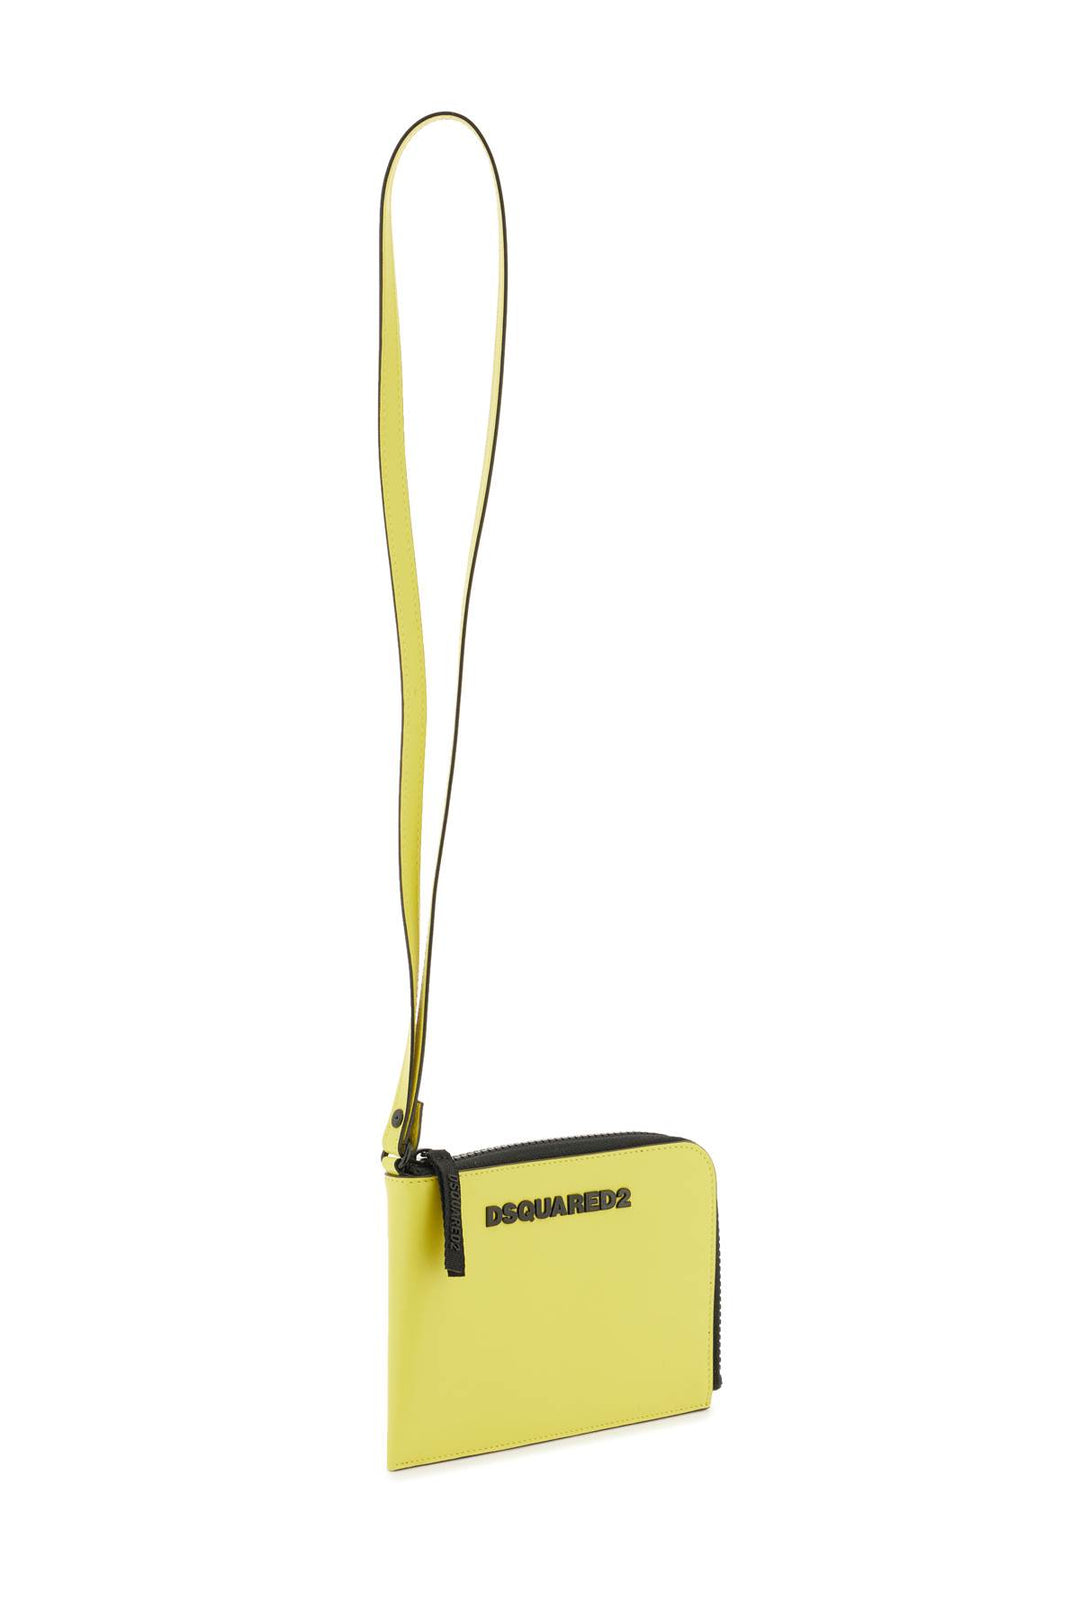 Dsquared2 Credit Card Pouch With Logo   Giallo